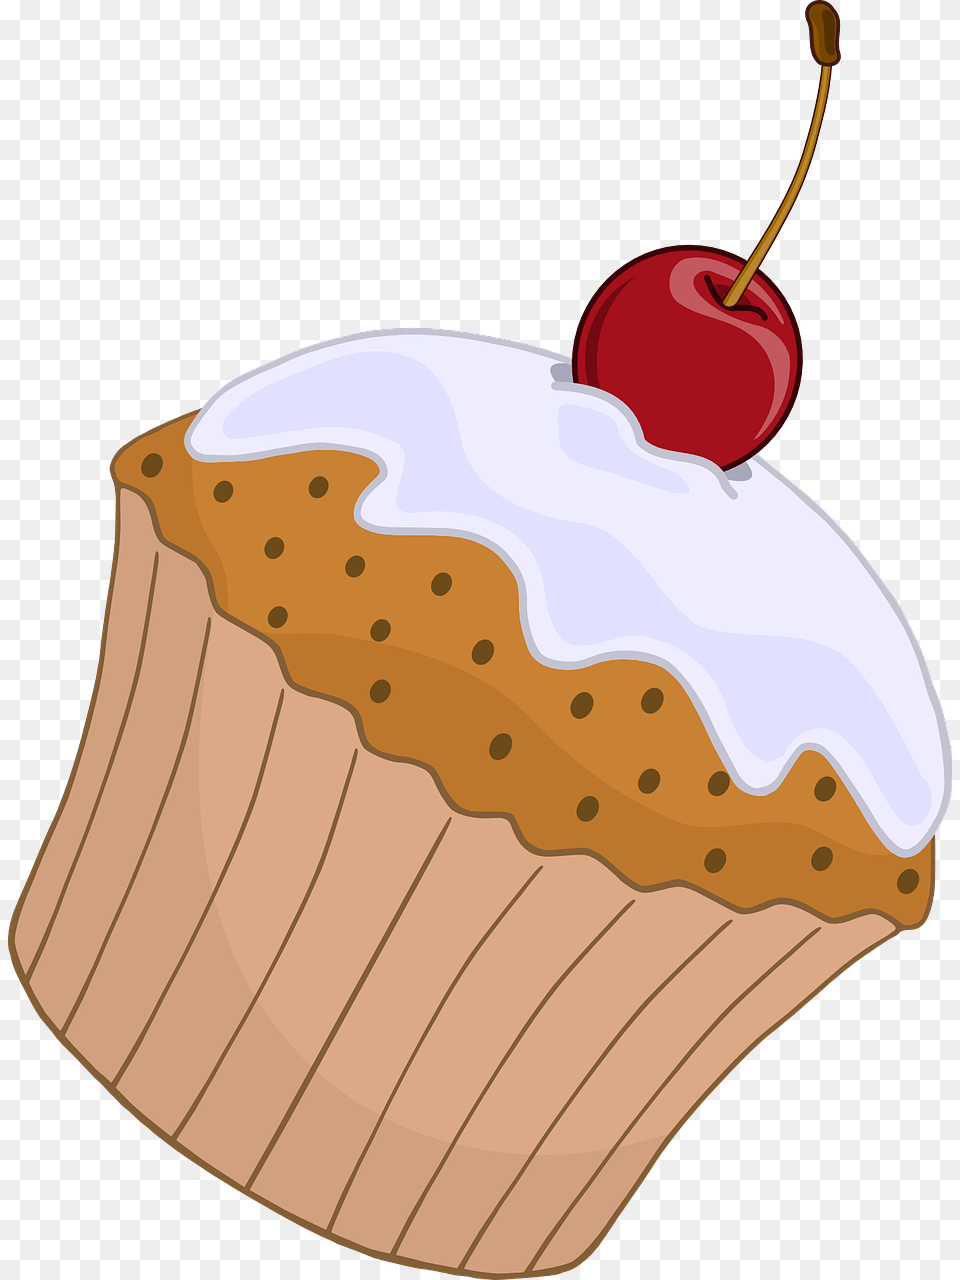 Cupcake Cake Cherry Stalk Icing Frosting Cliparts Muffin, Cream, Dessert, Food, Fruit Free Png